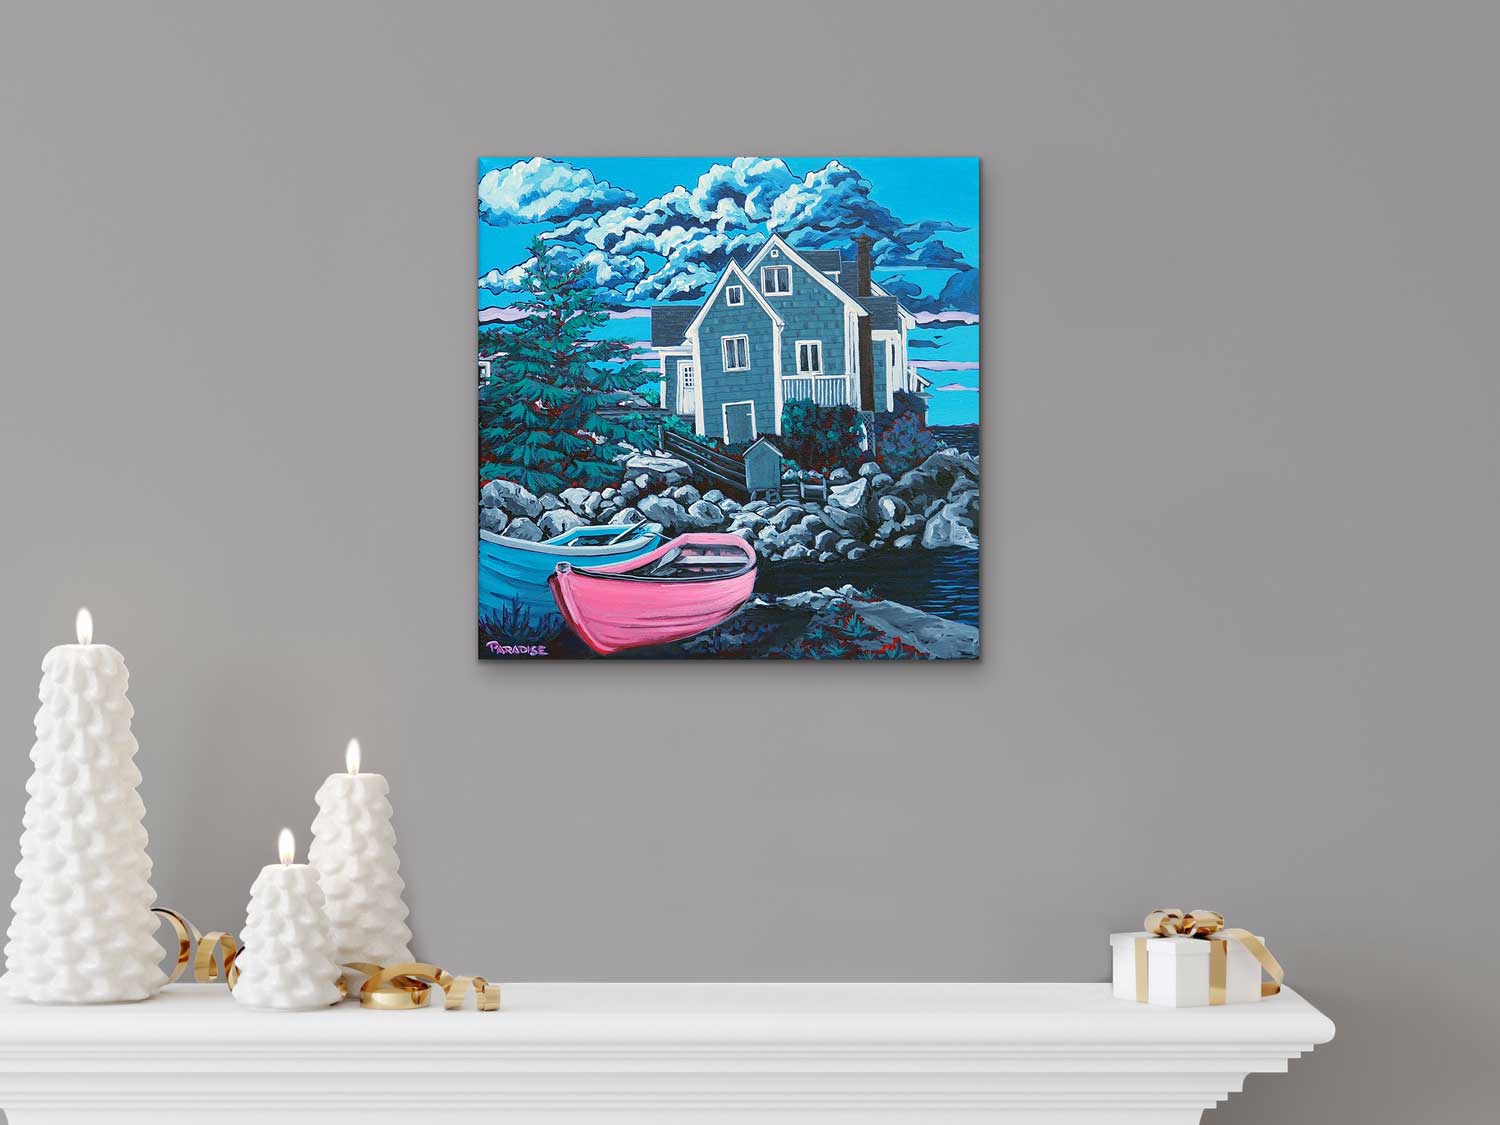 Peggy's Cove cozy peaceful country house with with small boat. Original painting by a professional Canadian landscape artist. visual art ready to hang on your wall.